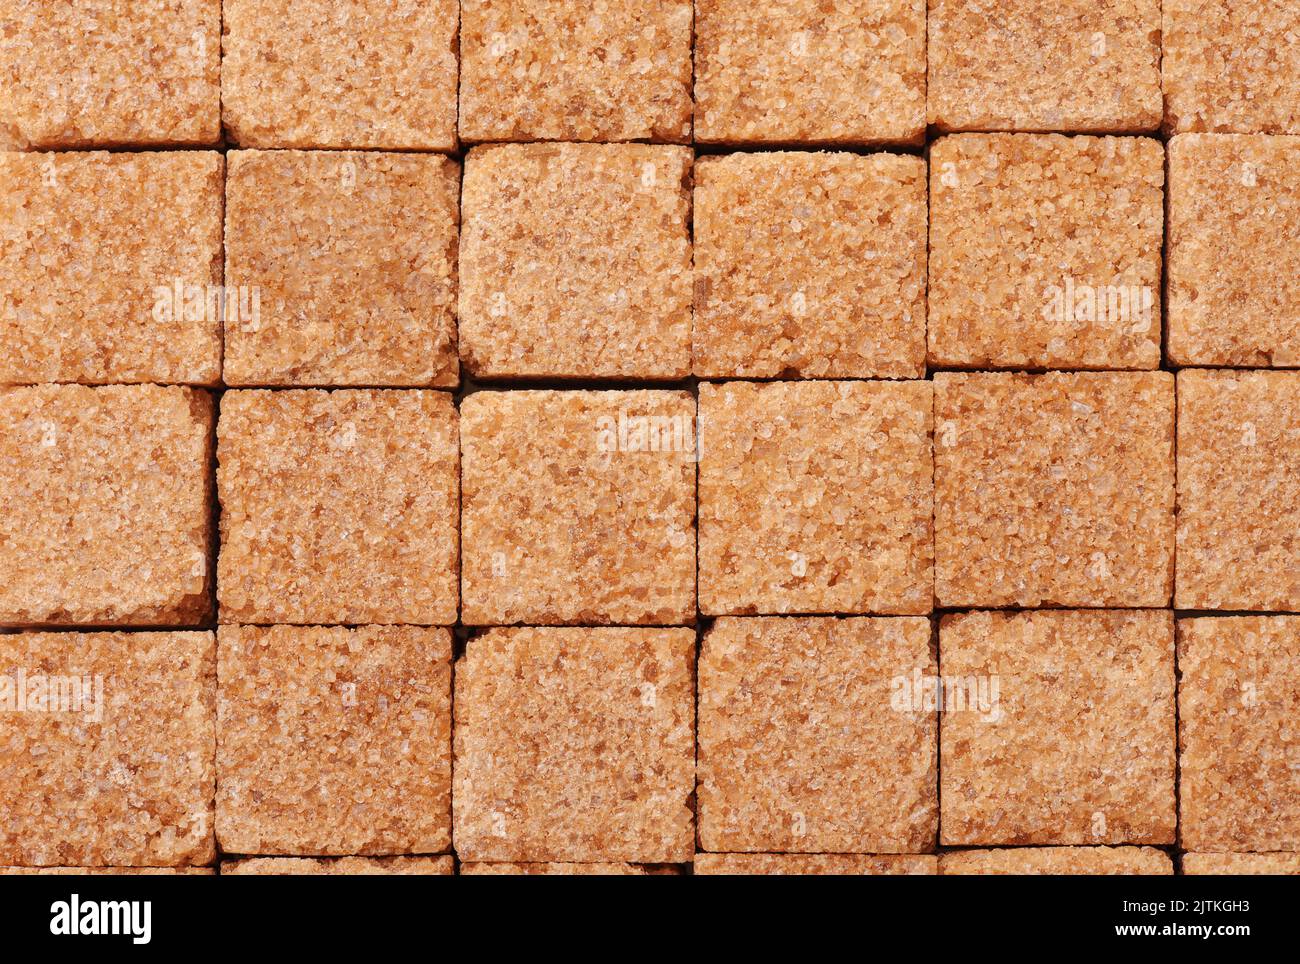 Top view of brown sugar cubes texture background Stock Photo